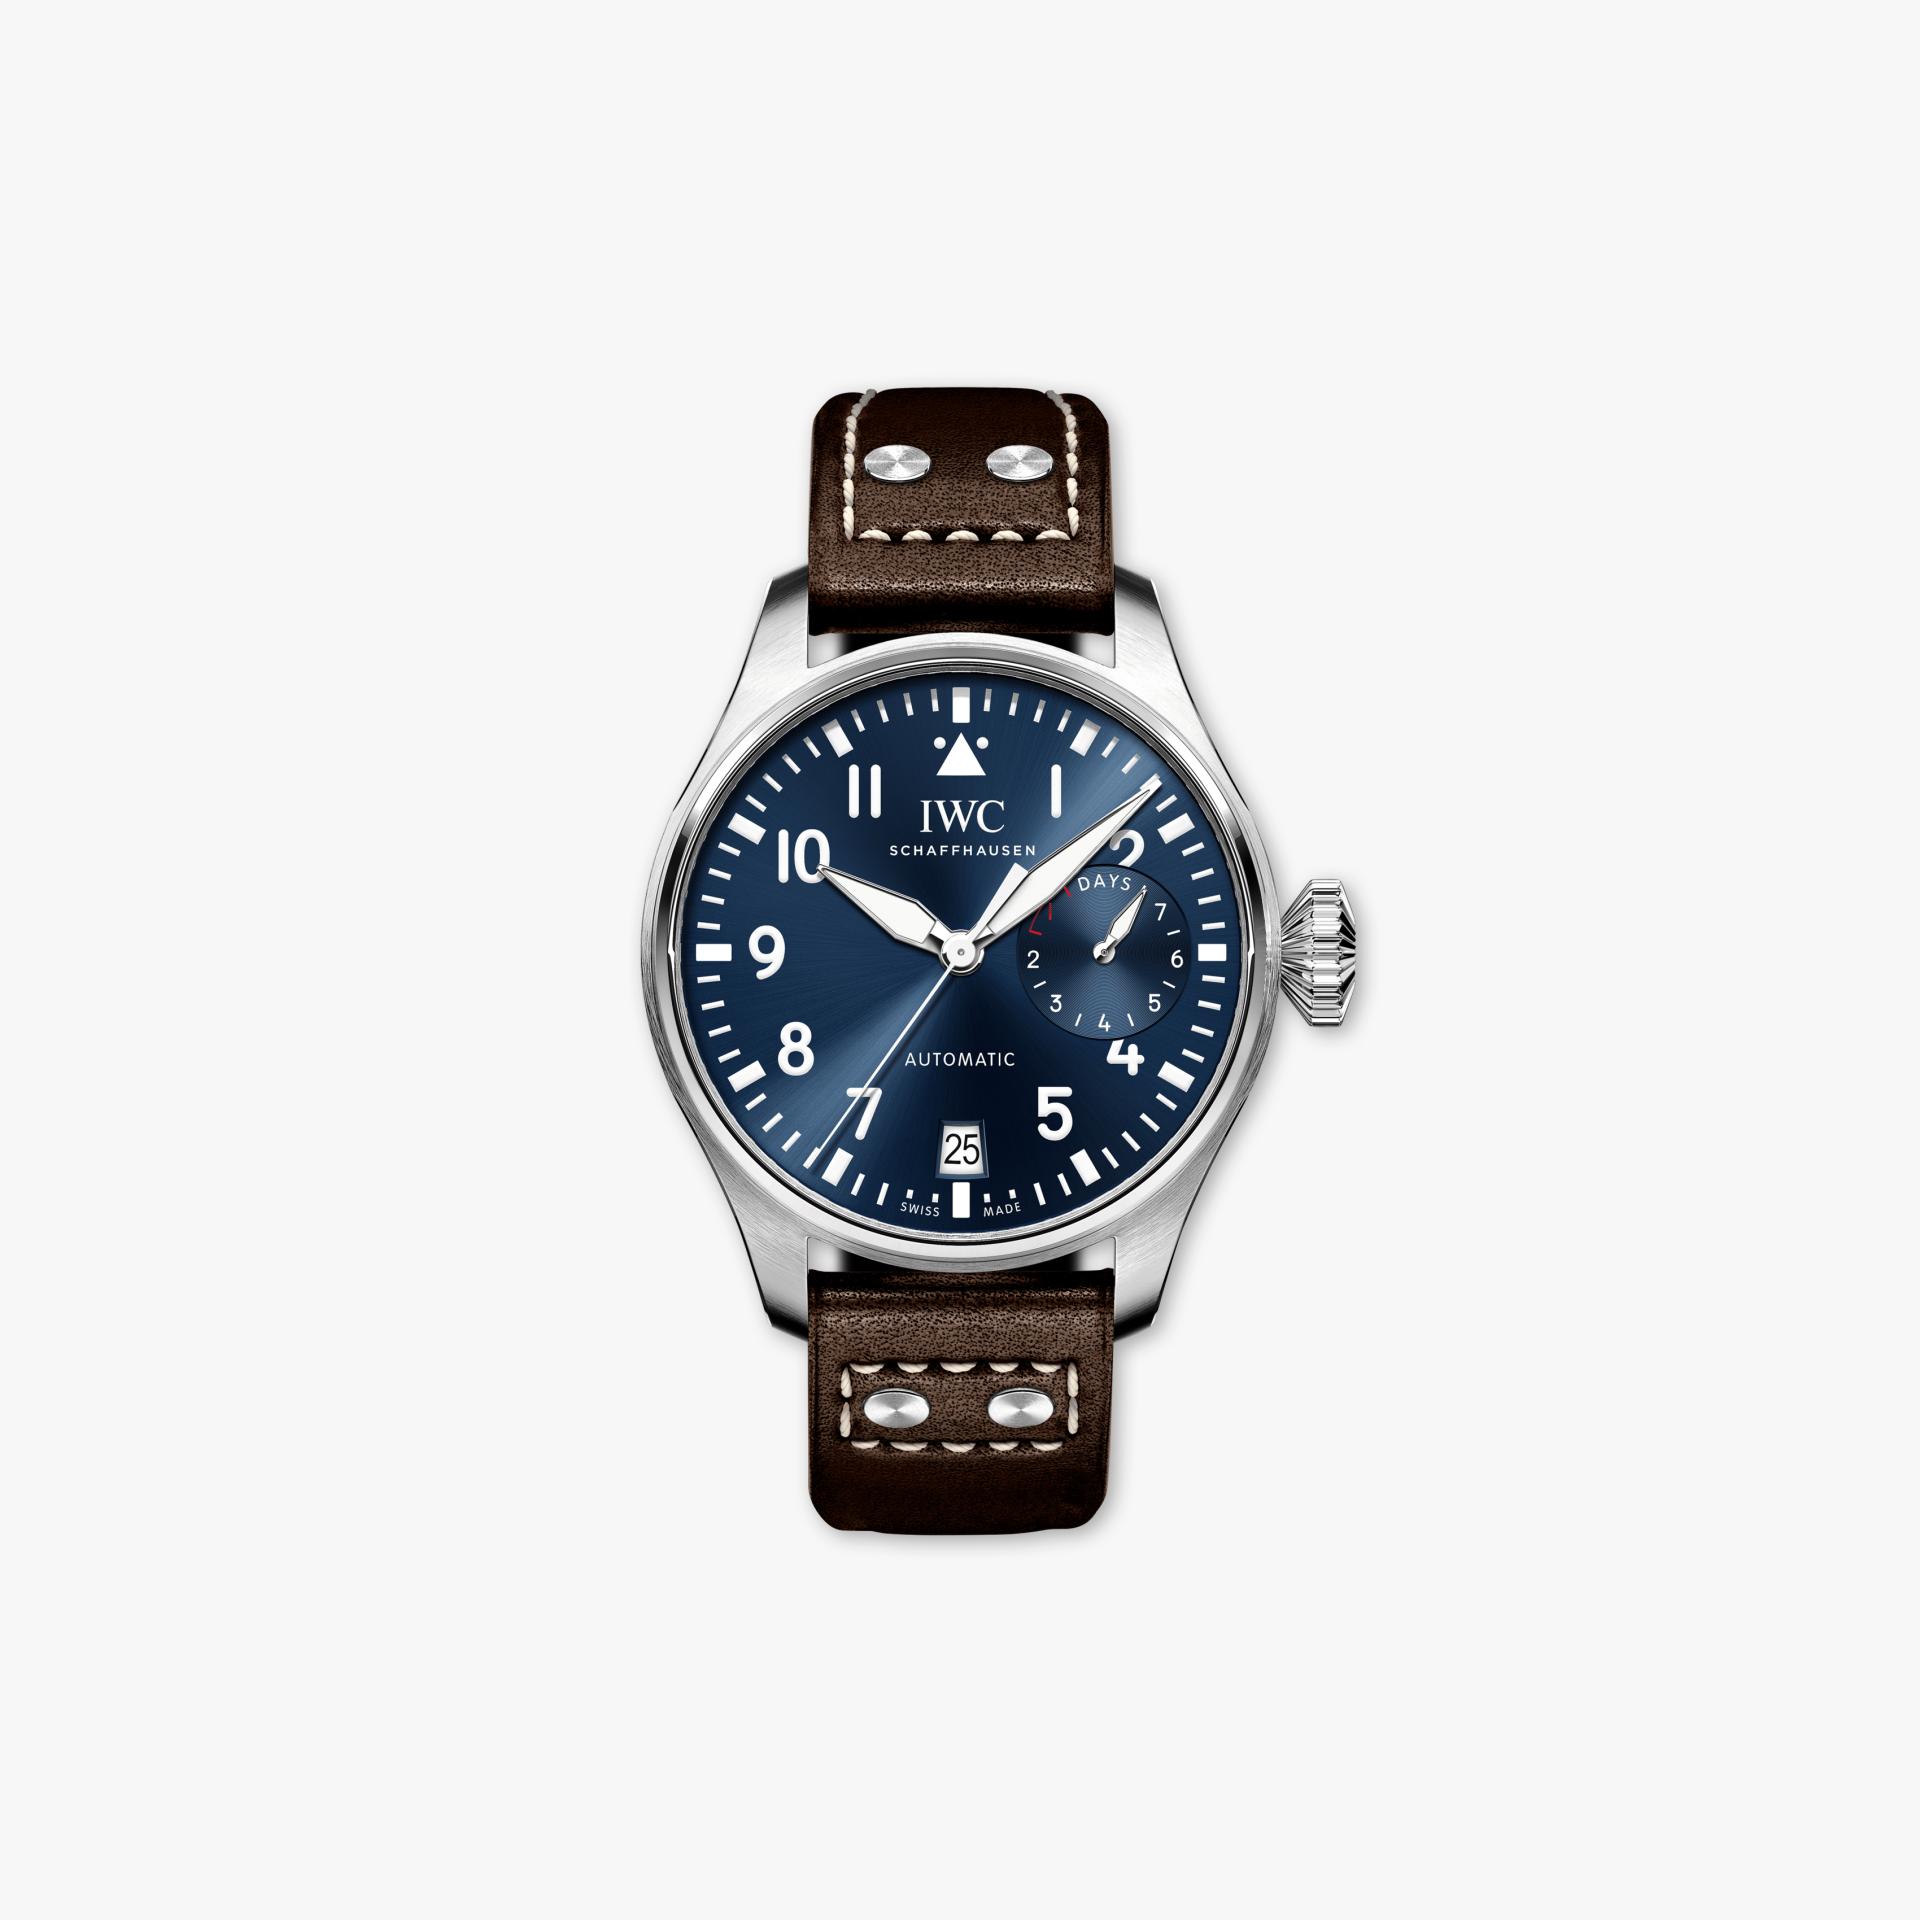 images/richmont-international--28iwc-29/iwc/pilot-s-watches/le-petit-prince/iw501002/iw501002_maison-de-greef_iwc-schaffhausen_watches_front.jpg